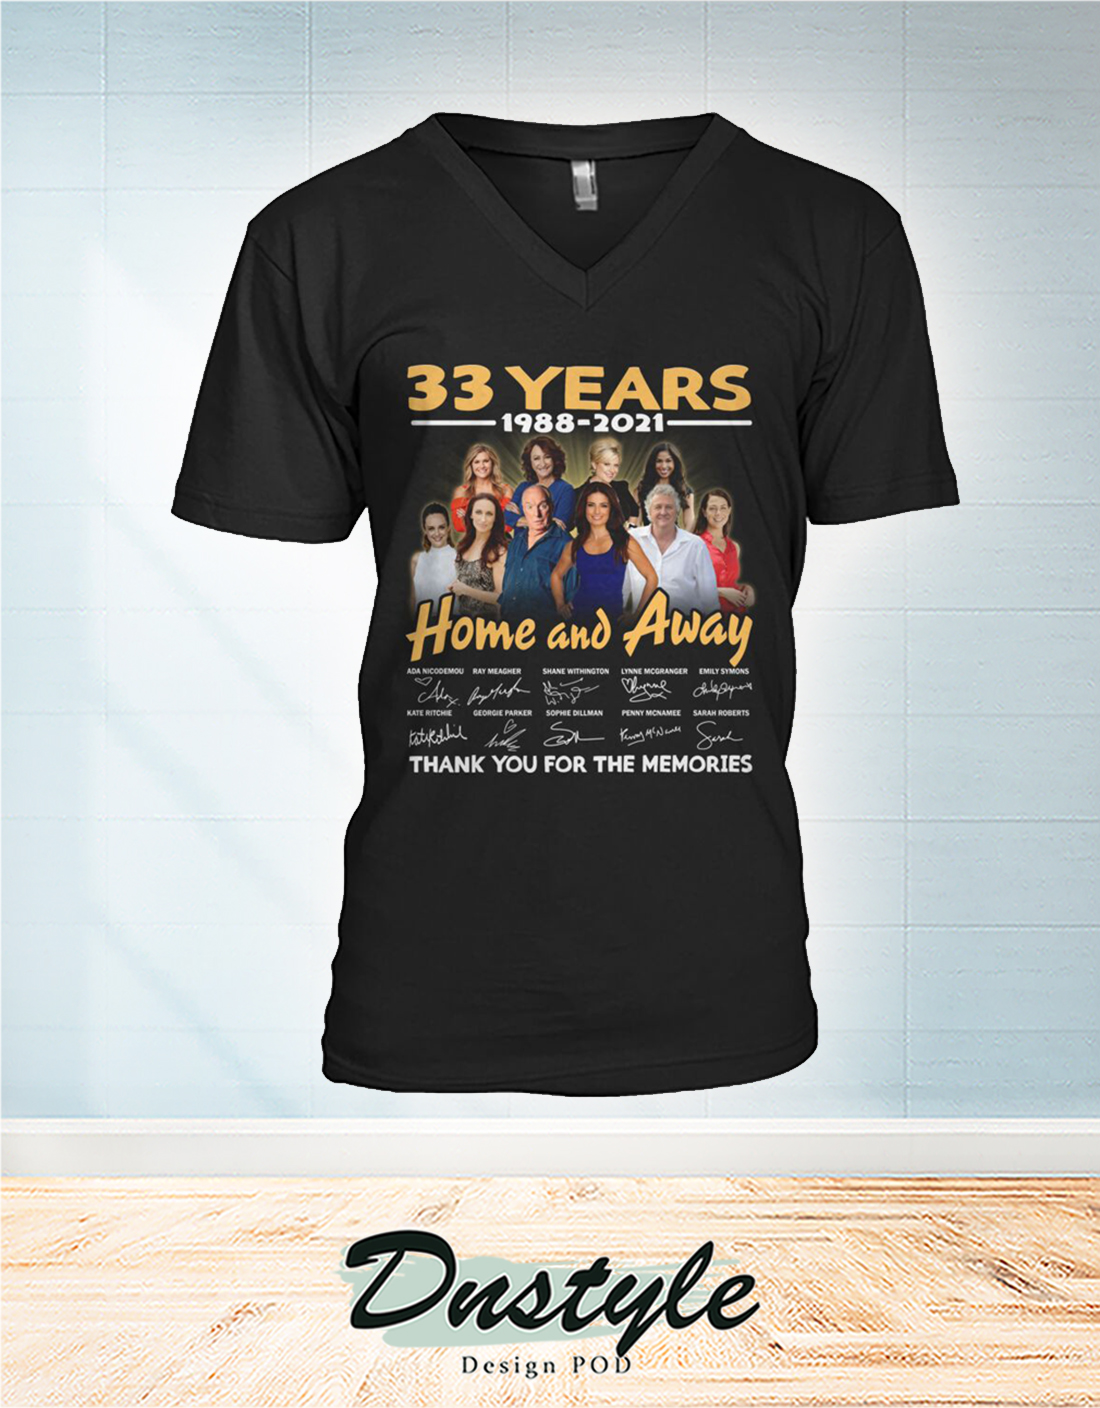 Home and away 33 years thank you for the memories v-neck